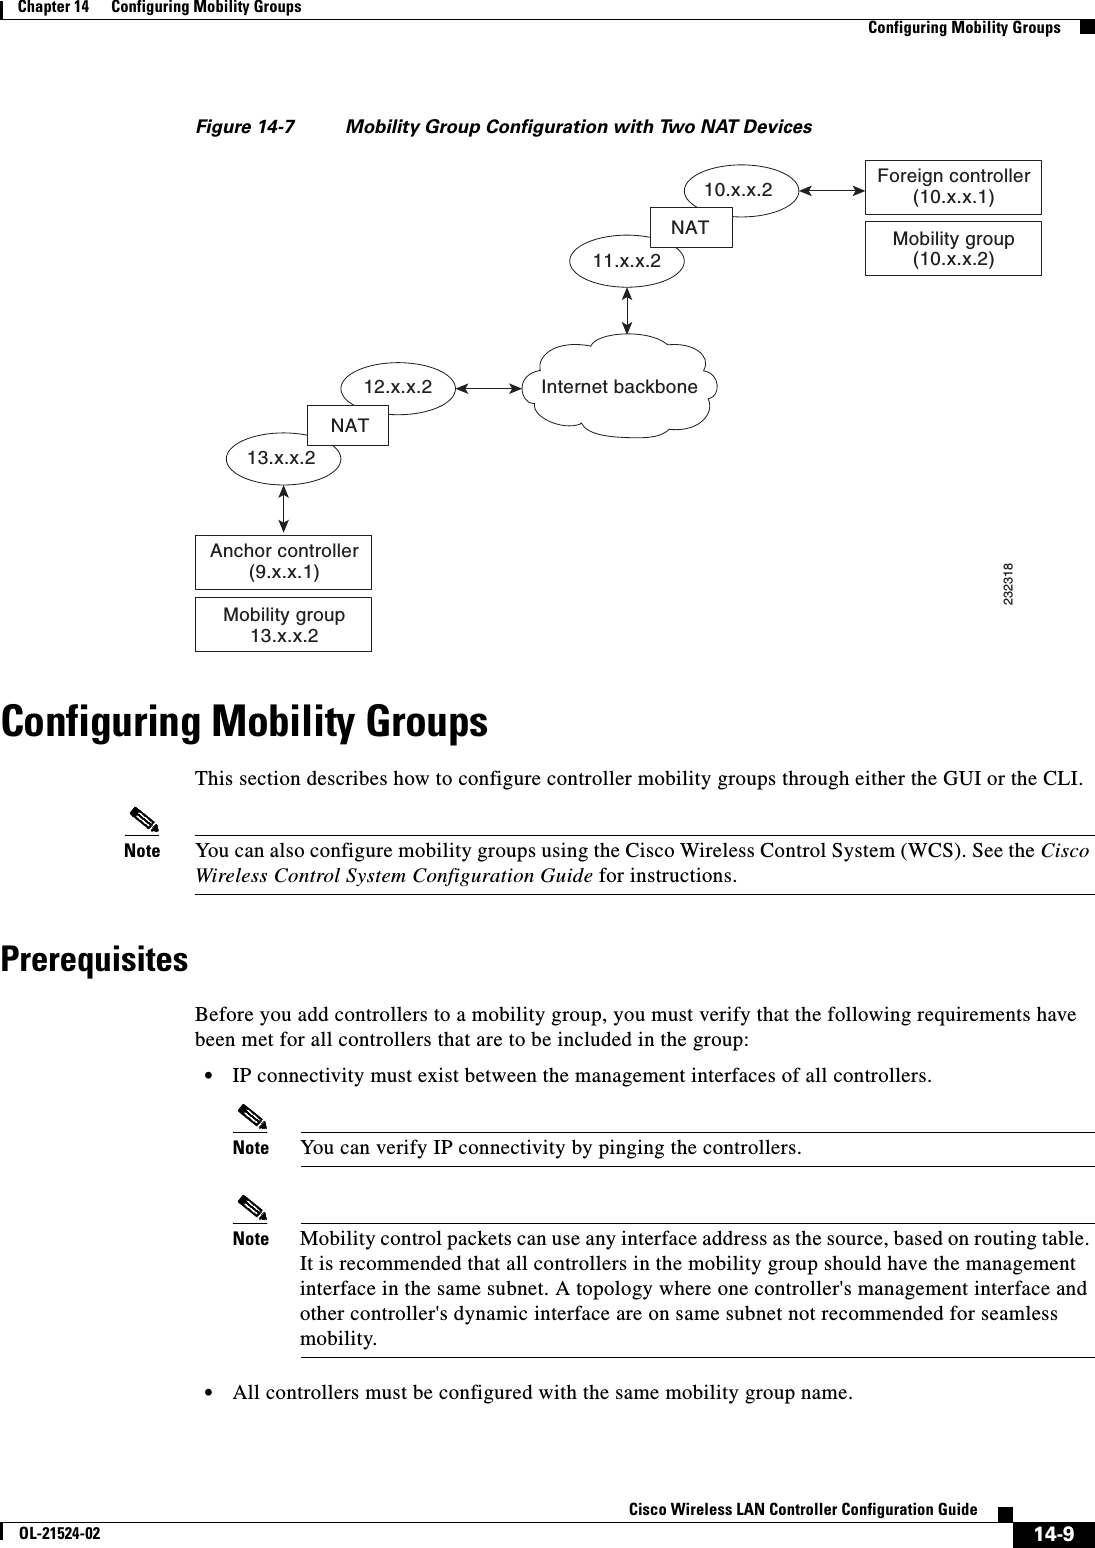  14-9Cisco Wireless LAN Controller Configuration GuideOL-21524-02Chapter 14      Configuring Mobility Groups  Configuring Mobility GroupsFigure 14-7 Mobility Group Configuration with Two NAT DevicesConfiguring Mobility GroupsThis section describes how to configure controller mobility groups through either the GUI or the CLI.Note You can also configure mobility groups using the Cisco Wireless Control System (WCS). See the Cisco Wireless Control System Configuration Guide for instructions.PrerequisitesBefore you add controllers to a mobility group, you must verify that the following requirements have been met for all controllers that are to be included in the group:  • IP connectivity must exist between the management interfaces of all controllers.Note You can verify IP connectivity by pinging the controllers.Note Mobility control packets can use any interface address as the source, based on routing table. It is recommended that all controllers in the mobility group should have the management interface in the same subnet. A topology where one controller&apos;s management interface and other controller&apos;s dynamic interface are on same subnet not recommended for seamless mobility.  • All controllers must be configured with the same mobility group name.12.x.x.213.x.x.2Anchor controller(9.x.x.1)Mobility group13.x.x.2Foreign controller(10.x.x.1)Mobility group(10.x.x.2)10.x.x.211.x.x.2232318NATNATInternet backbone